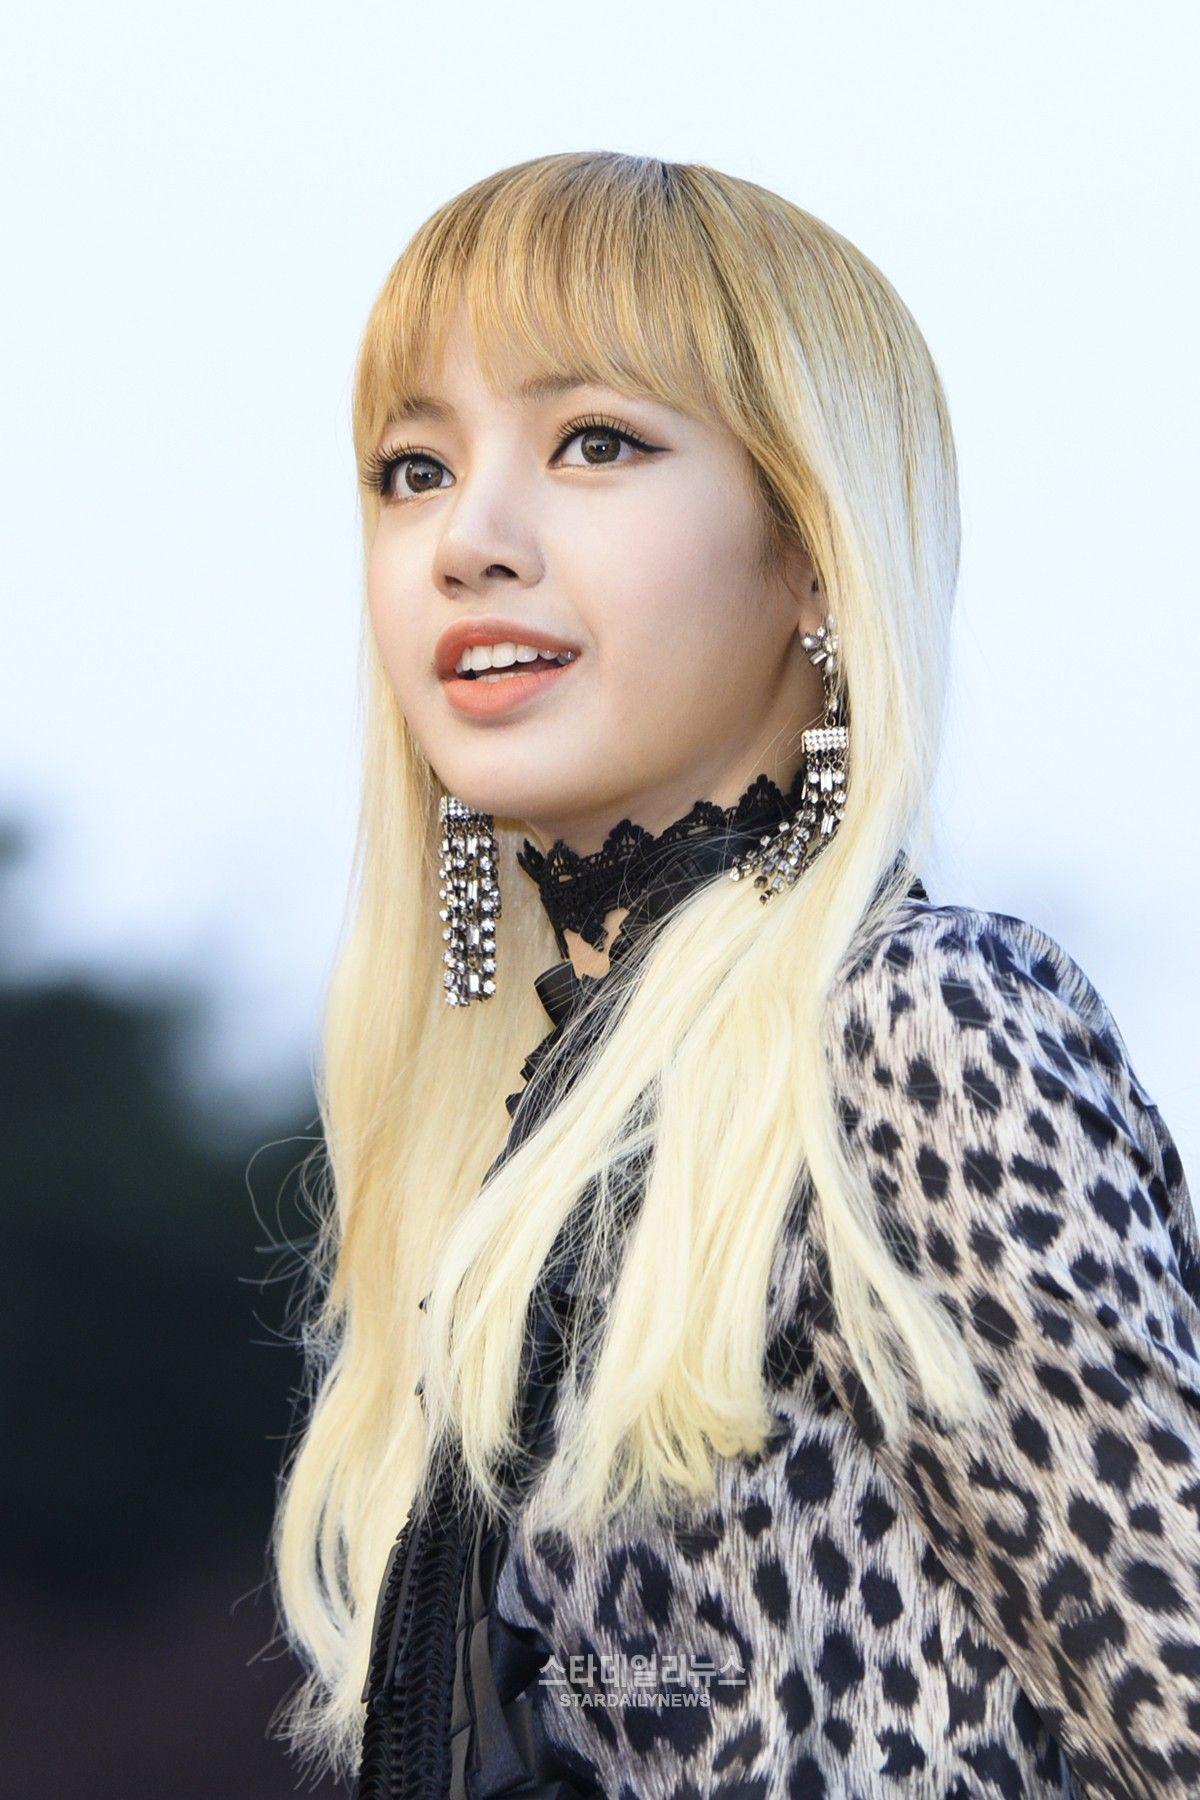 Times BLACKPINK Lisa Changed Her Hairstyle Since Debut